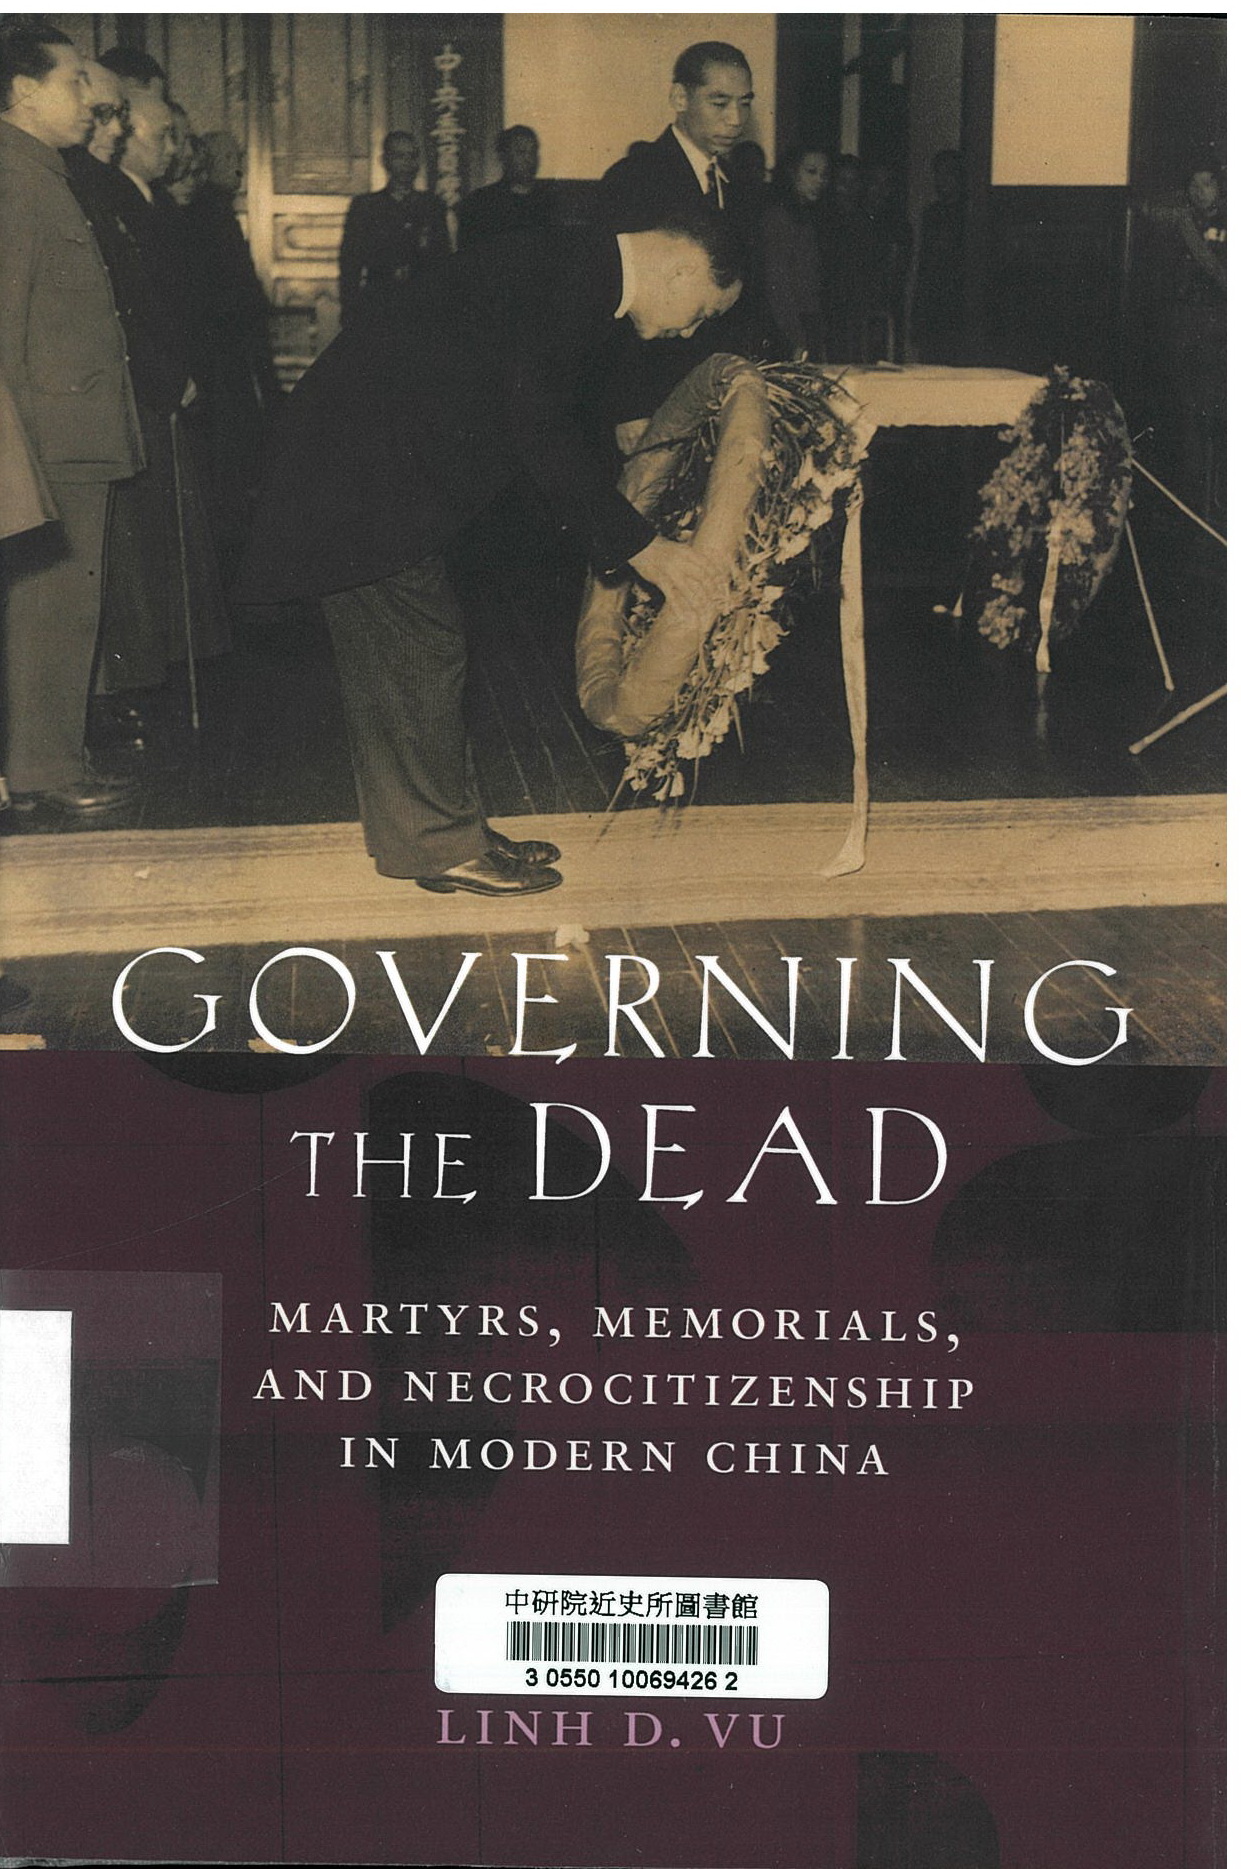 Governing the dead :martyrs, memorials, and necrocitizenship in modern China